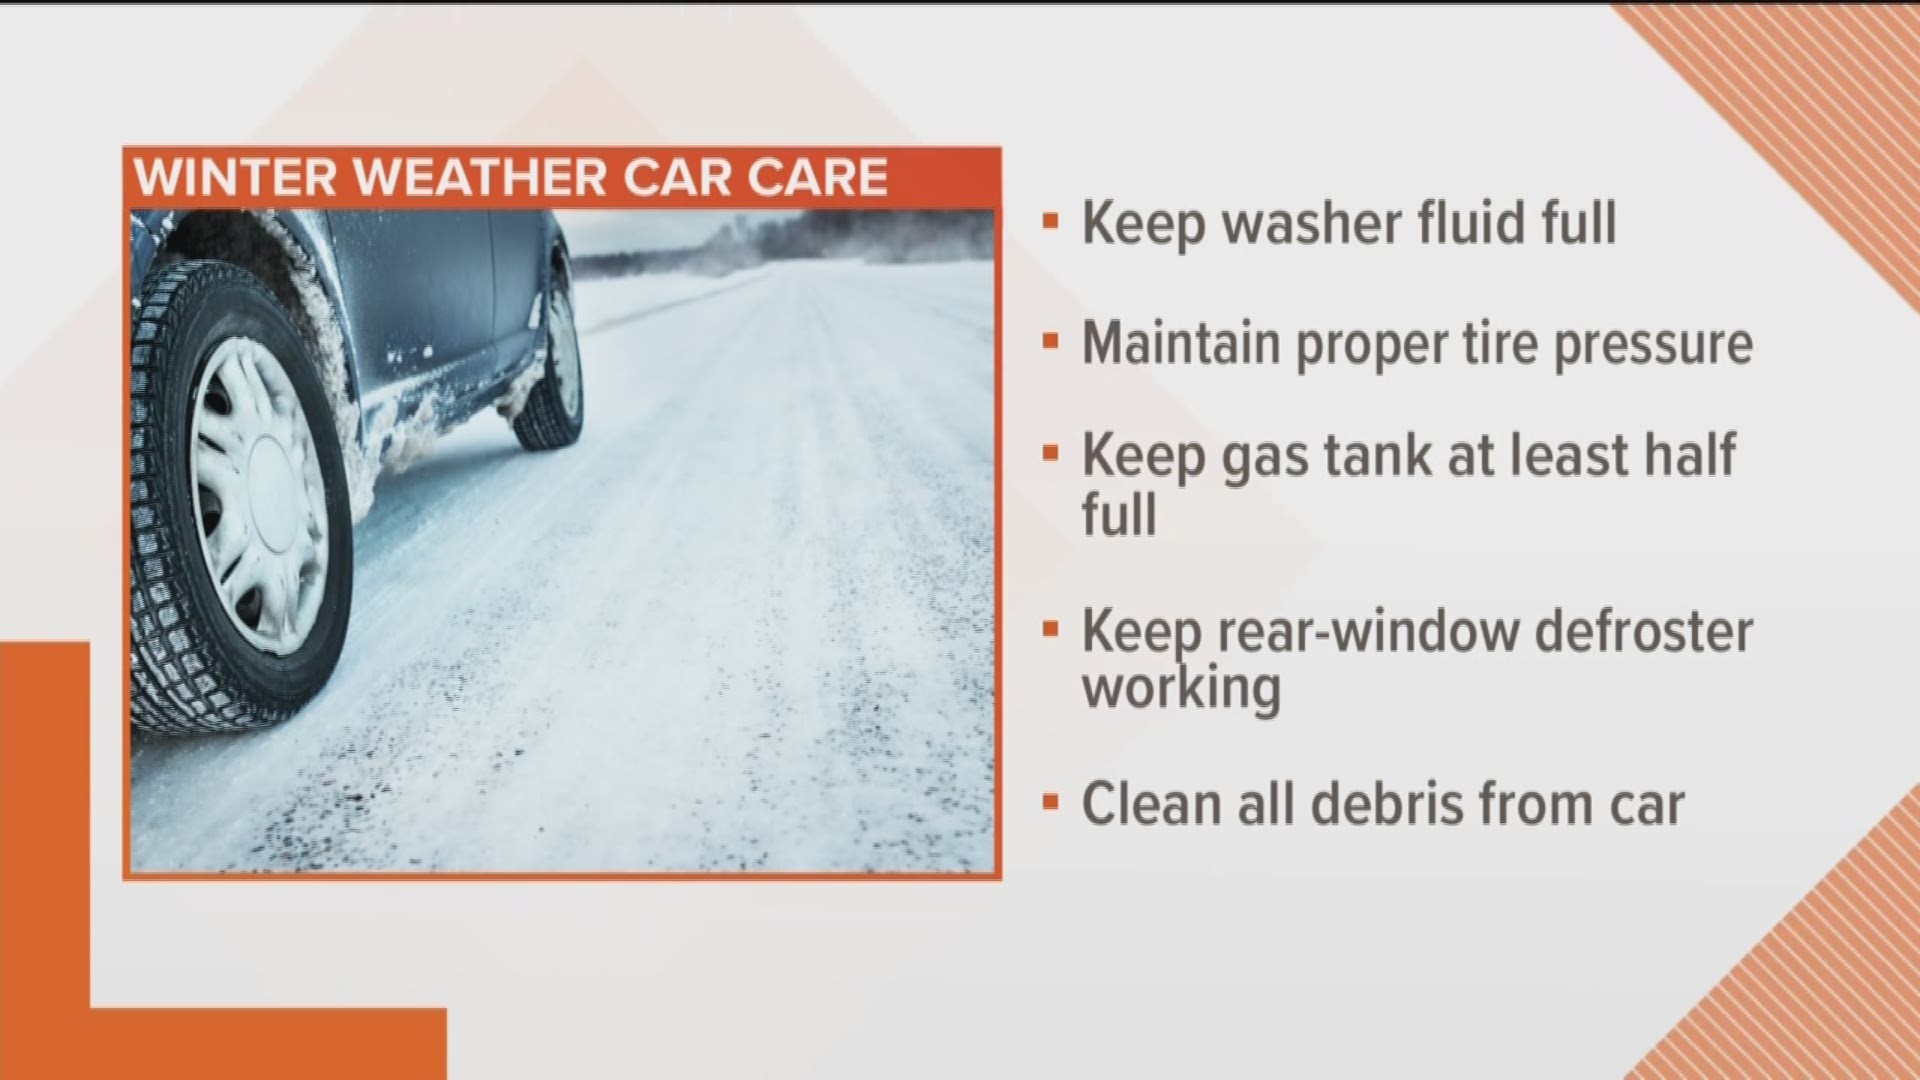 With more snow on the way, here are some reminders to help you avoid winter car problems. https://kare11.tv/2BIwMQ3